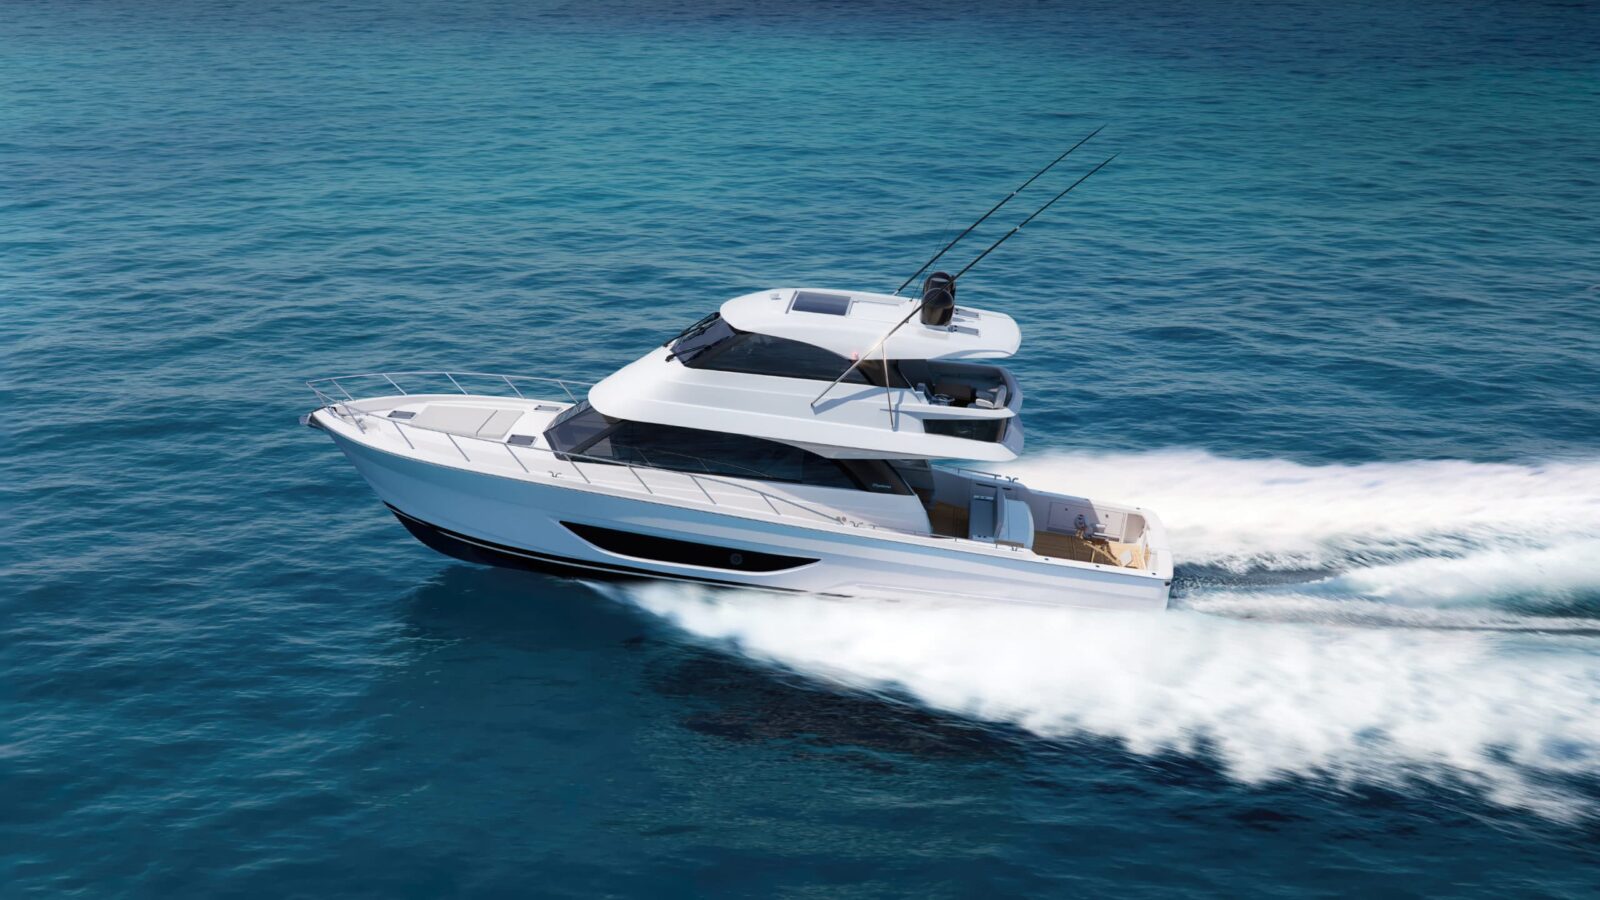 Maritimo to make American debut of two new models at Fort Lauderdale International Boat Show